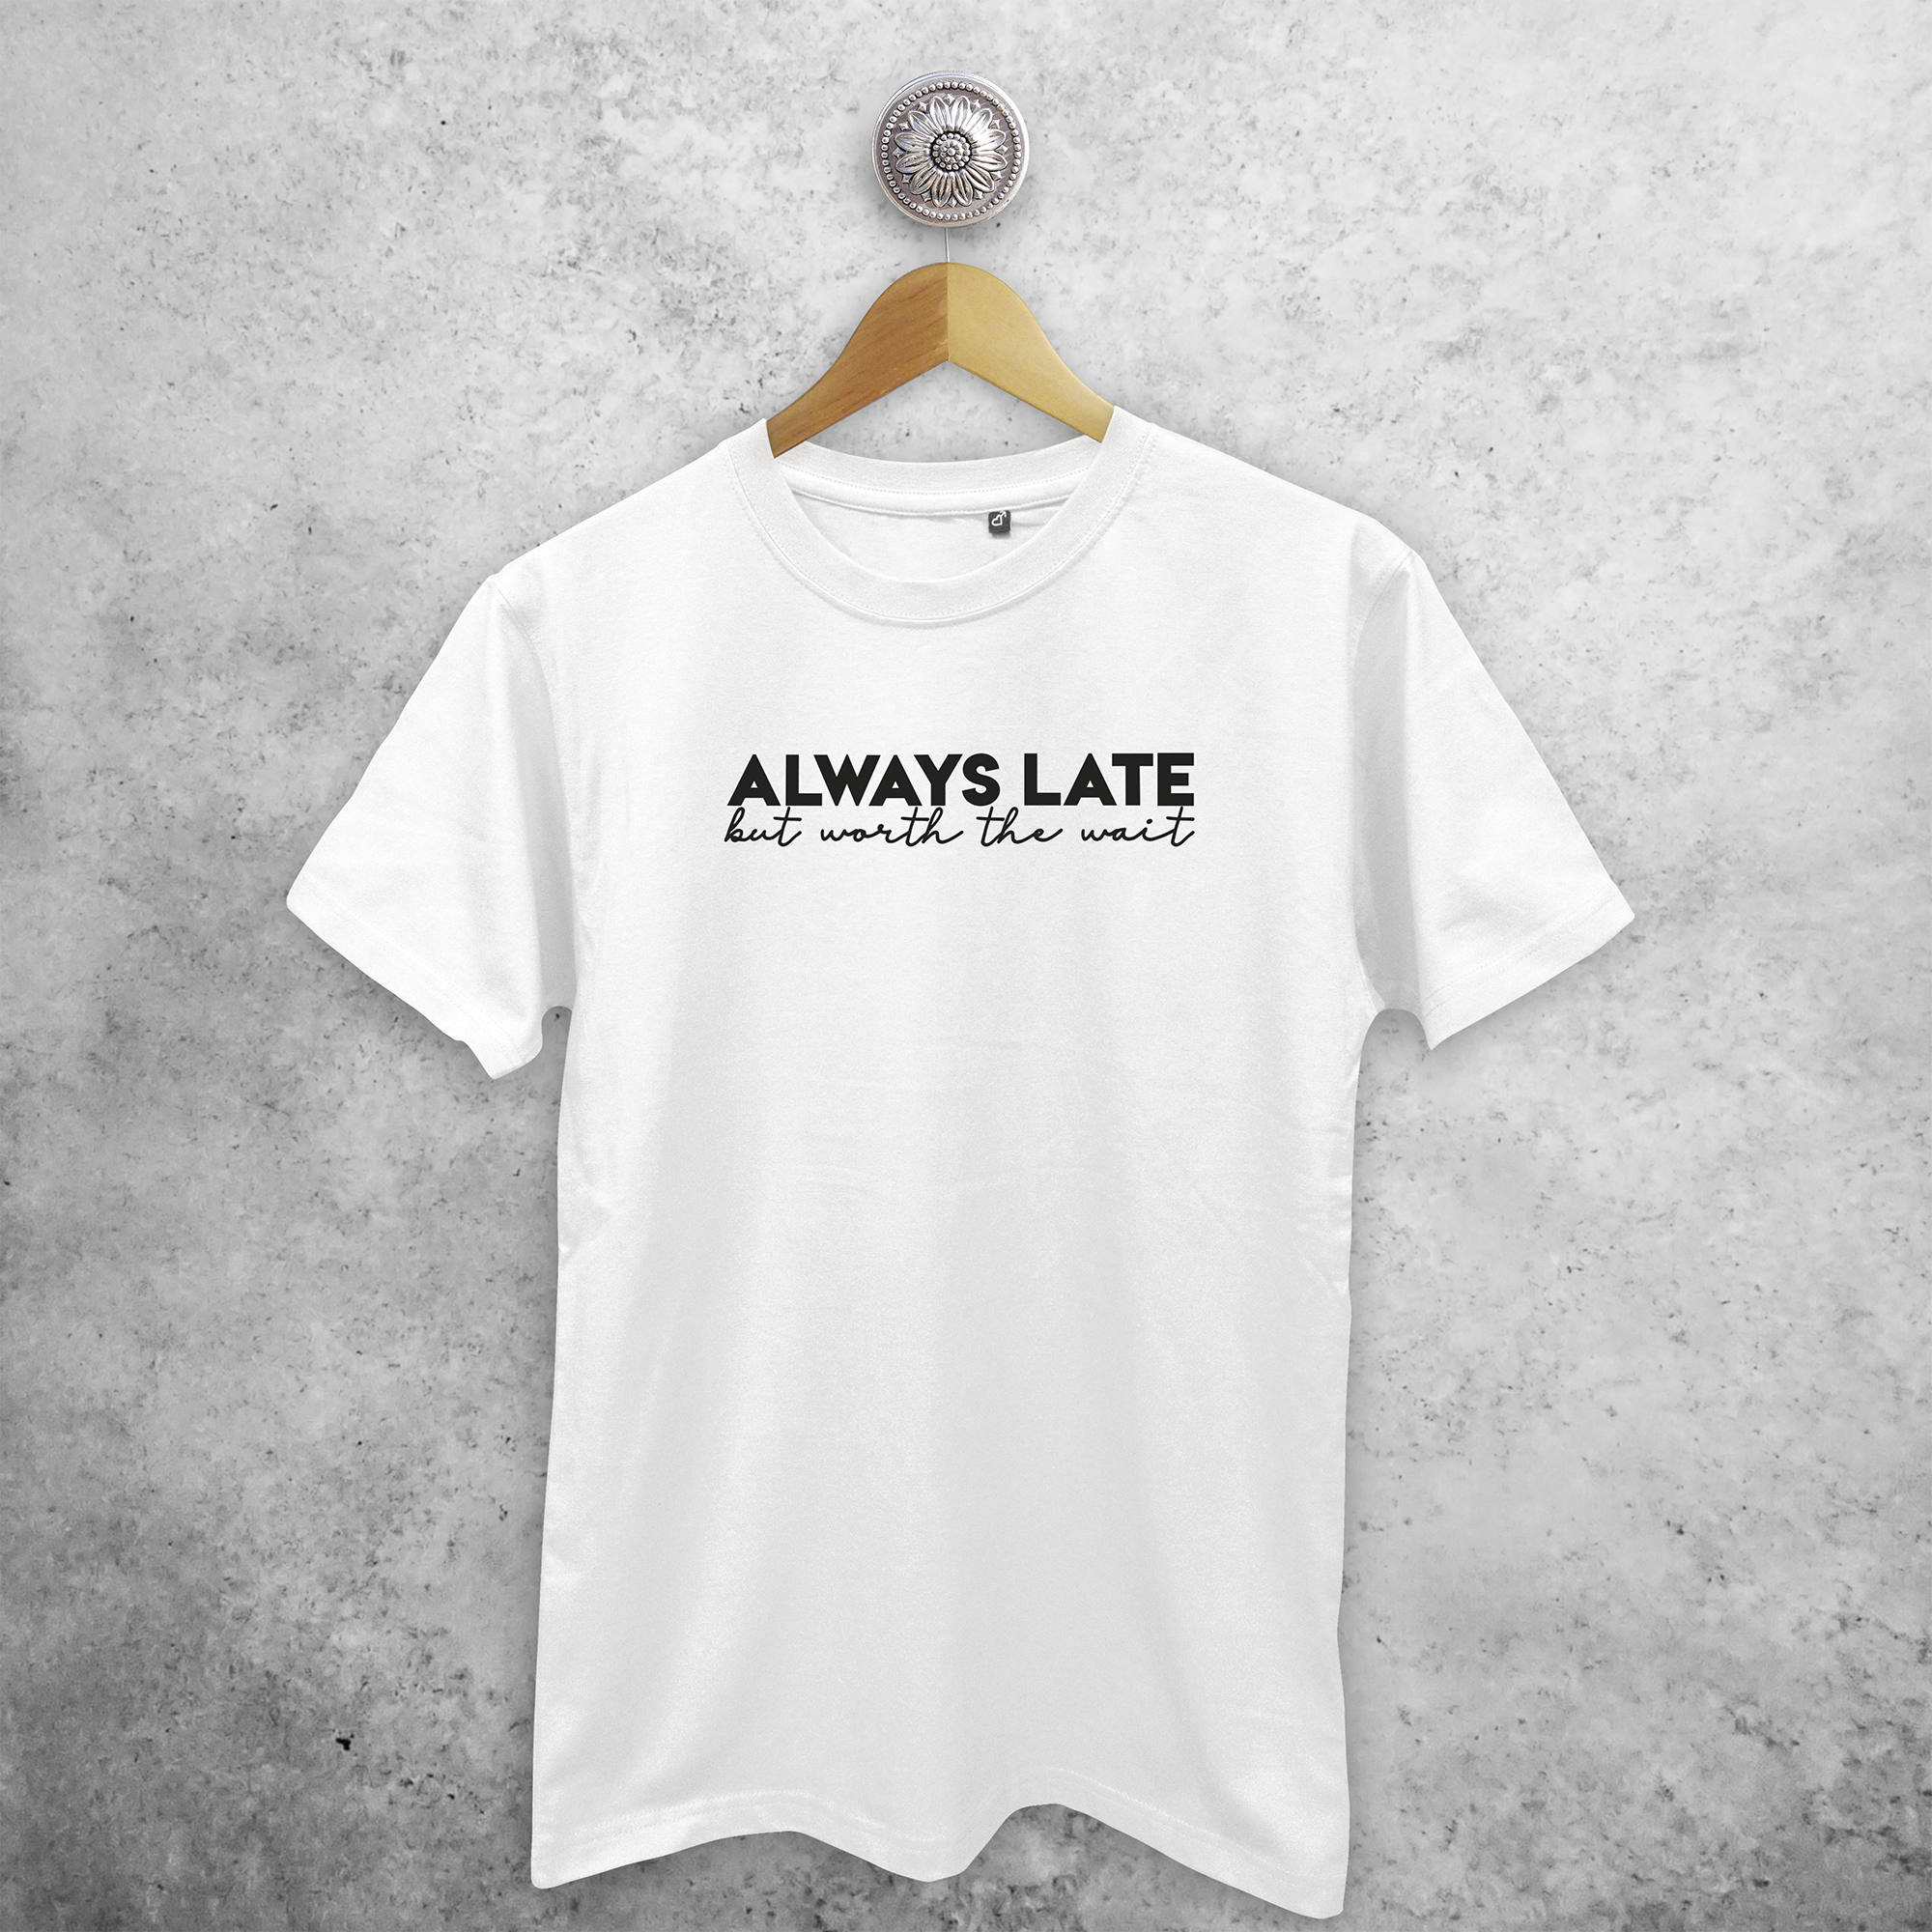 'Always late, but worth the wait' adult shirt